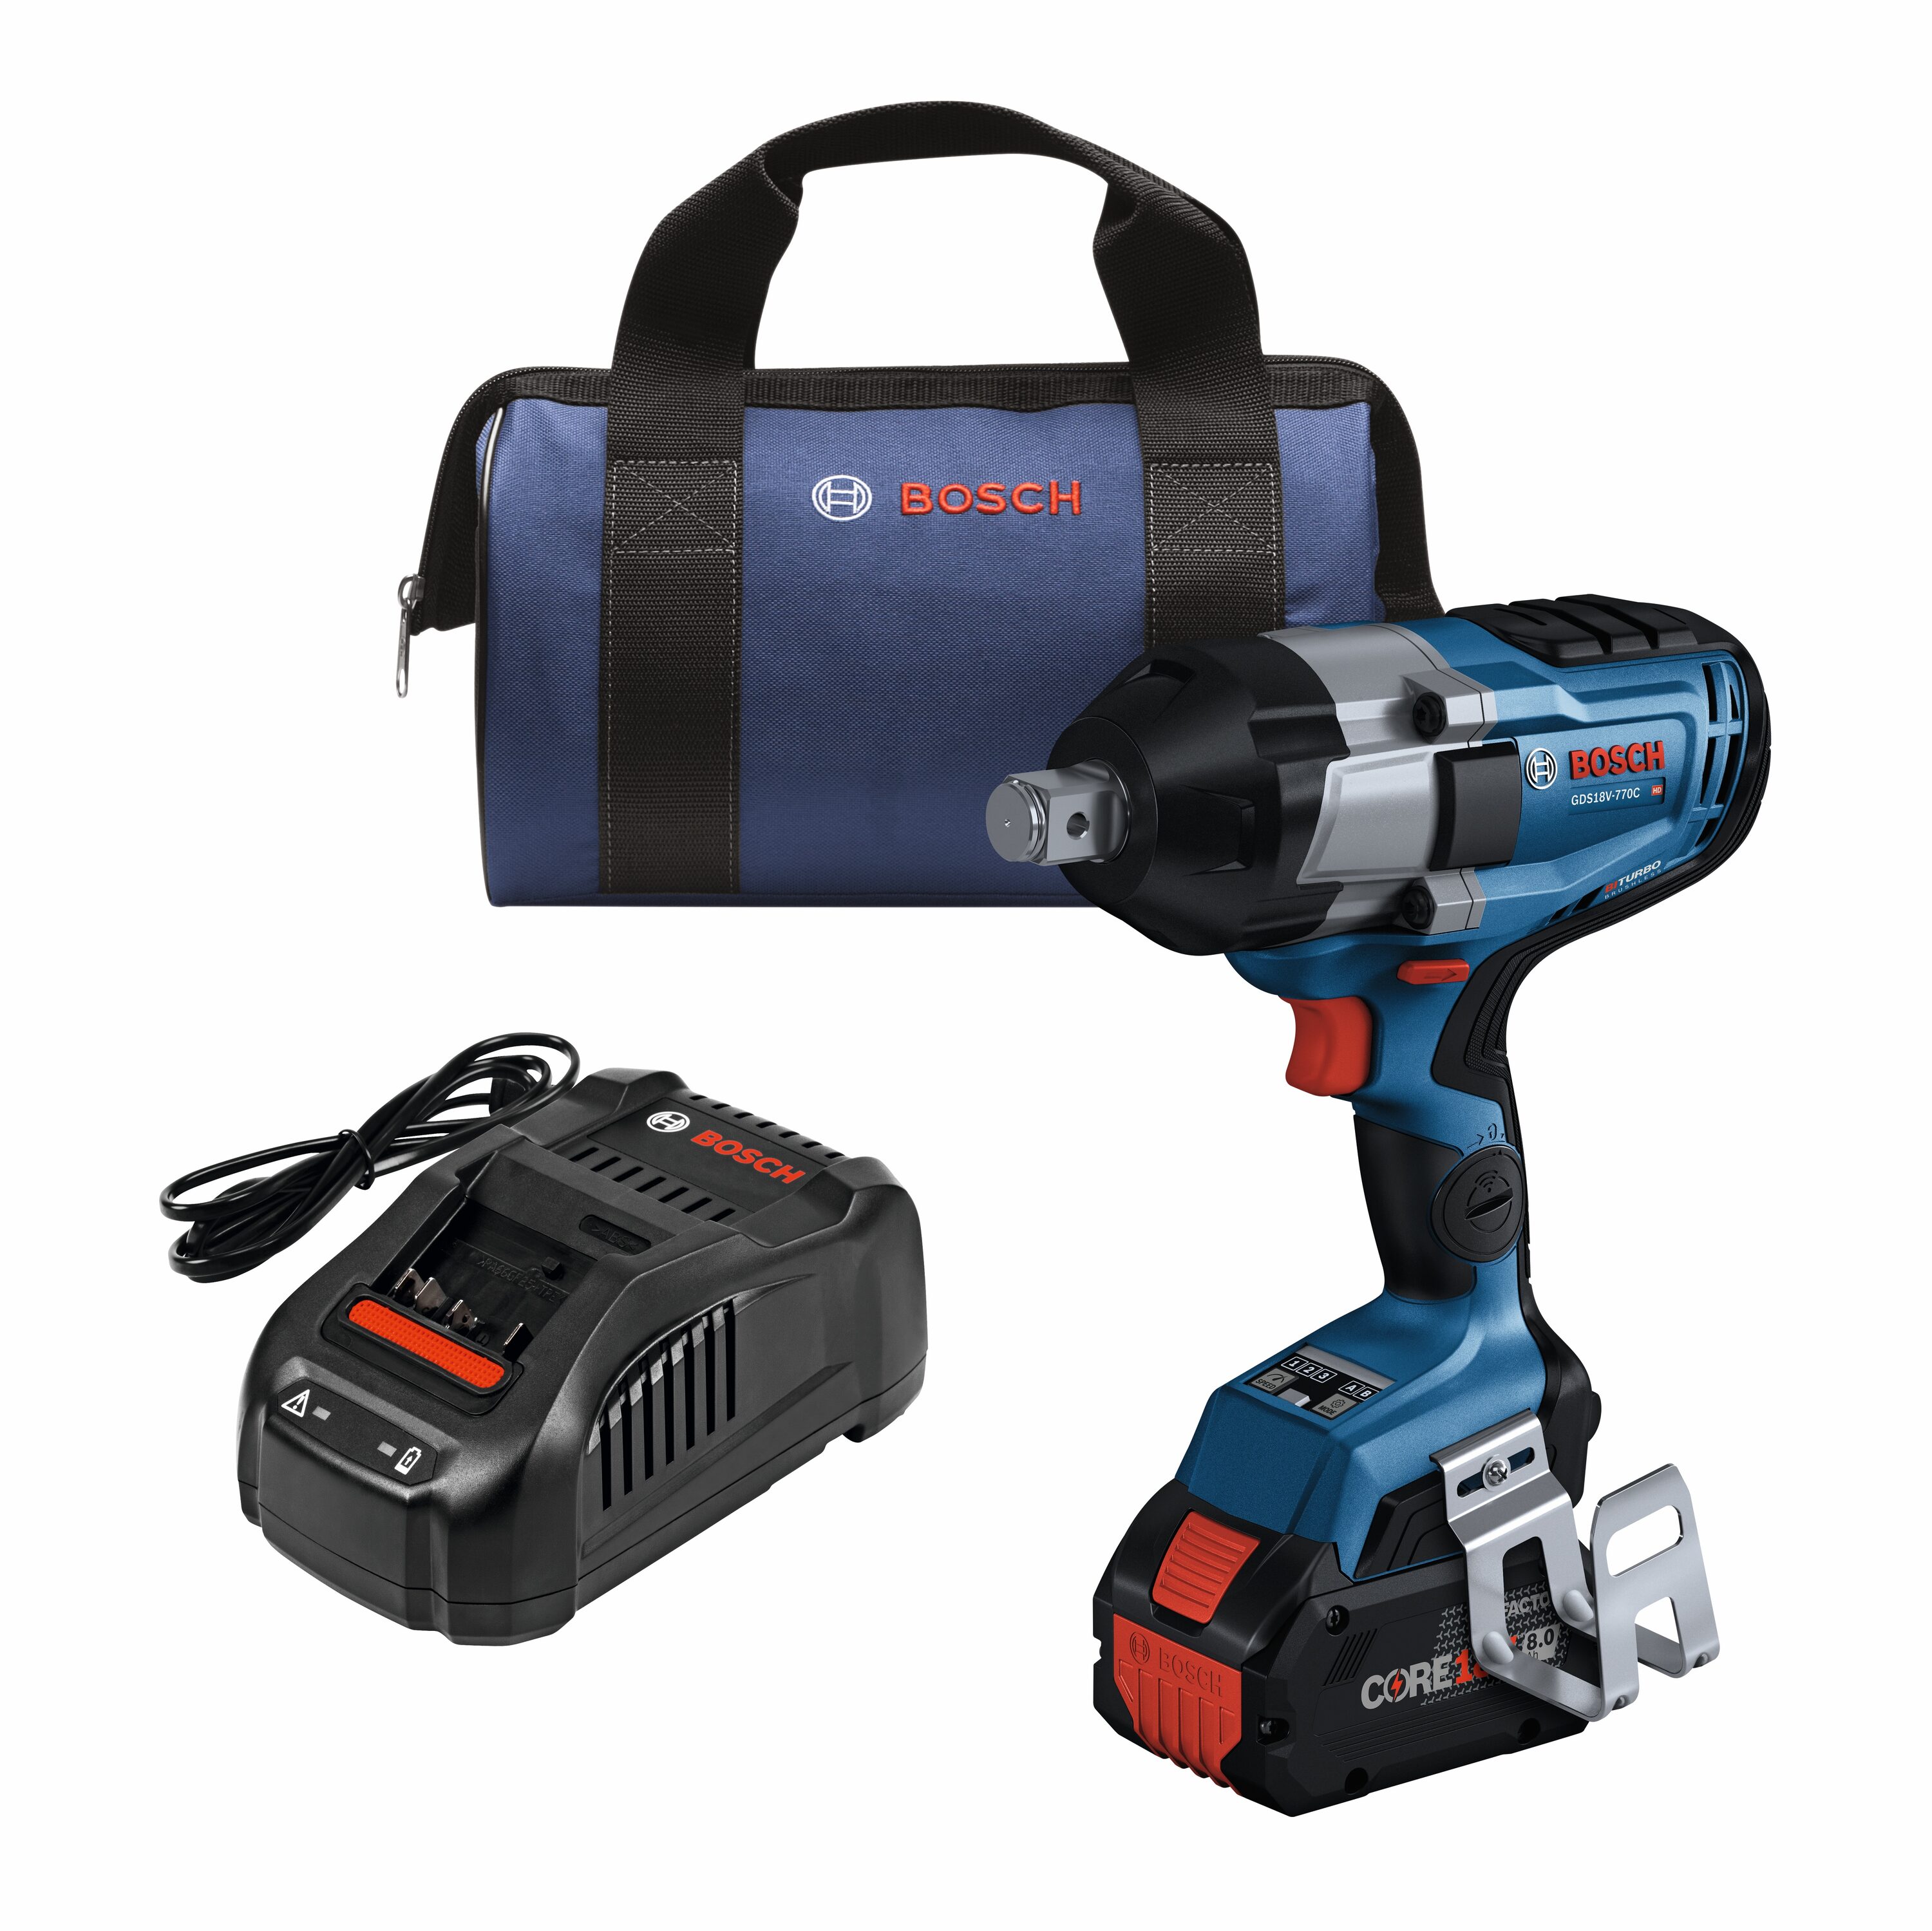 Bosch 8-Amp 18-volt Variable Speed Brushless 3/4-in square Drive